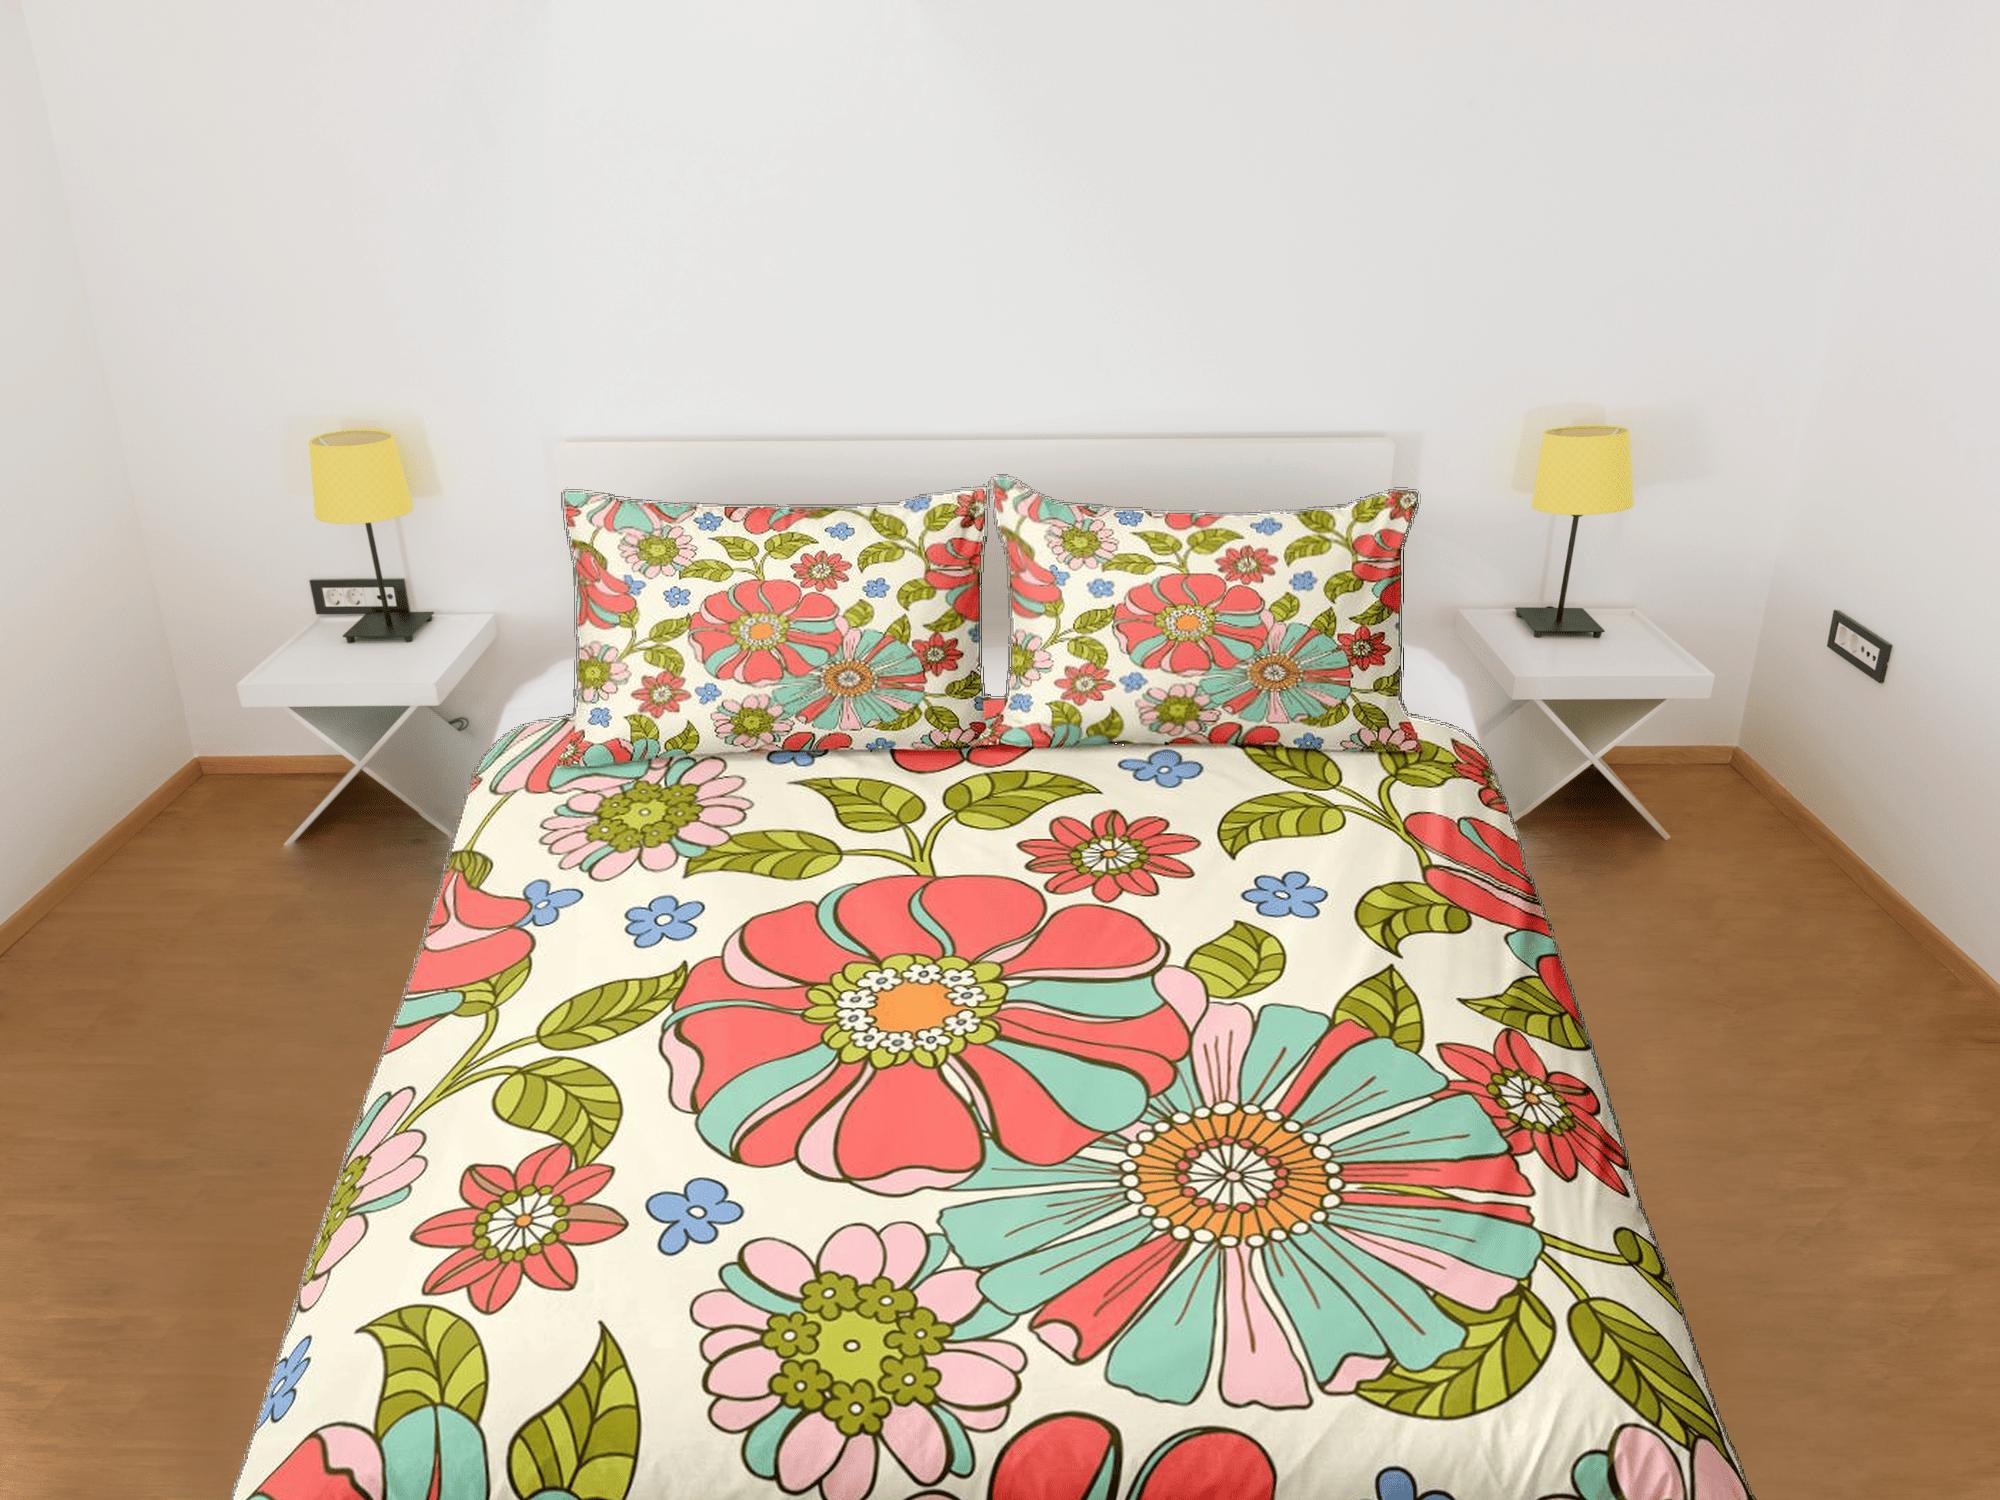 daintyduvet Mid century modern bedding colorful floral duvet cover colorful retro bedding, vintage style boho chic bedspread daisy shabby chic bedding